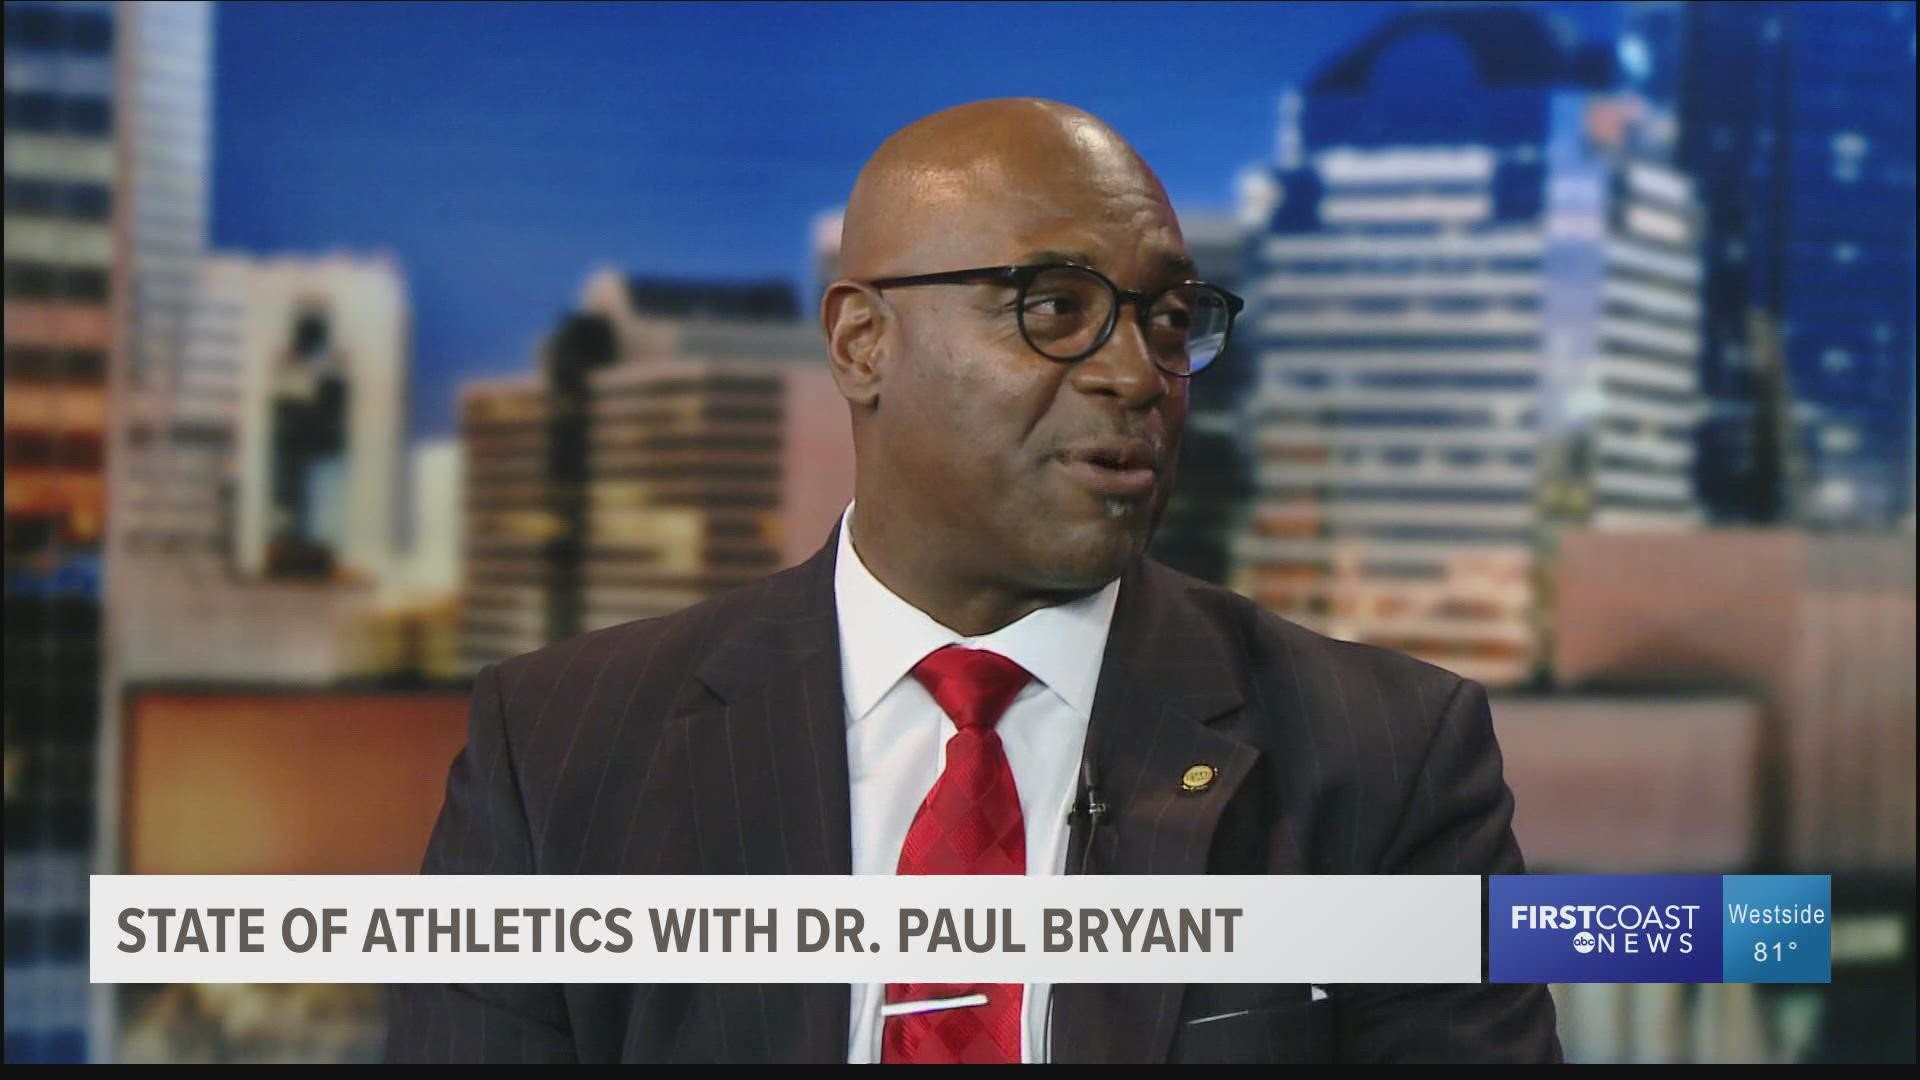 Sources tell First Coast News that Dr. Paul Bryant has accepted a position at Alabama A&M University.